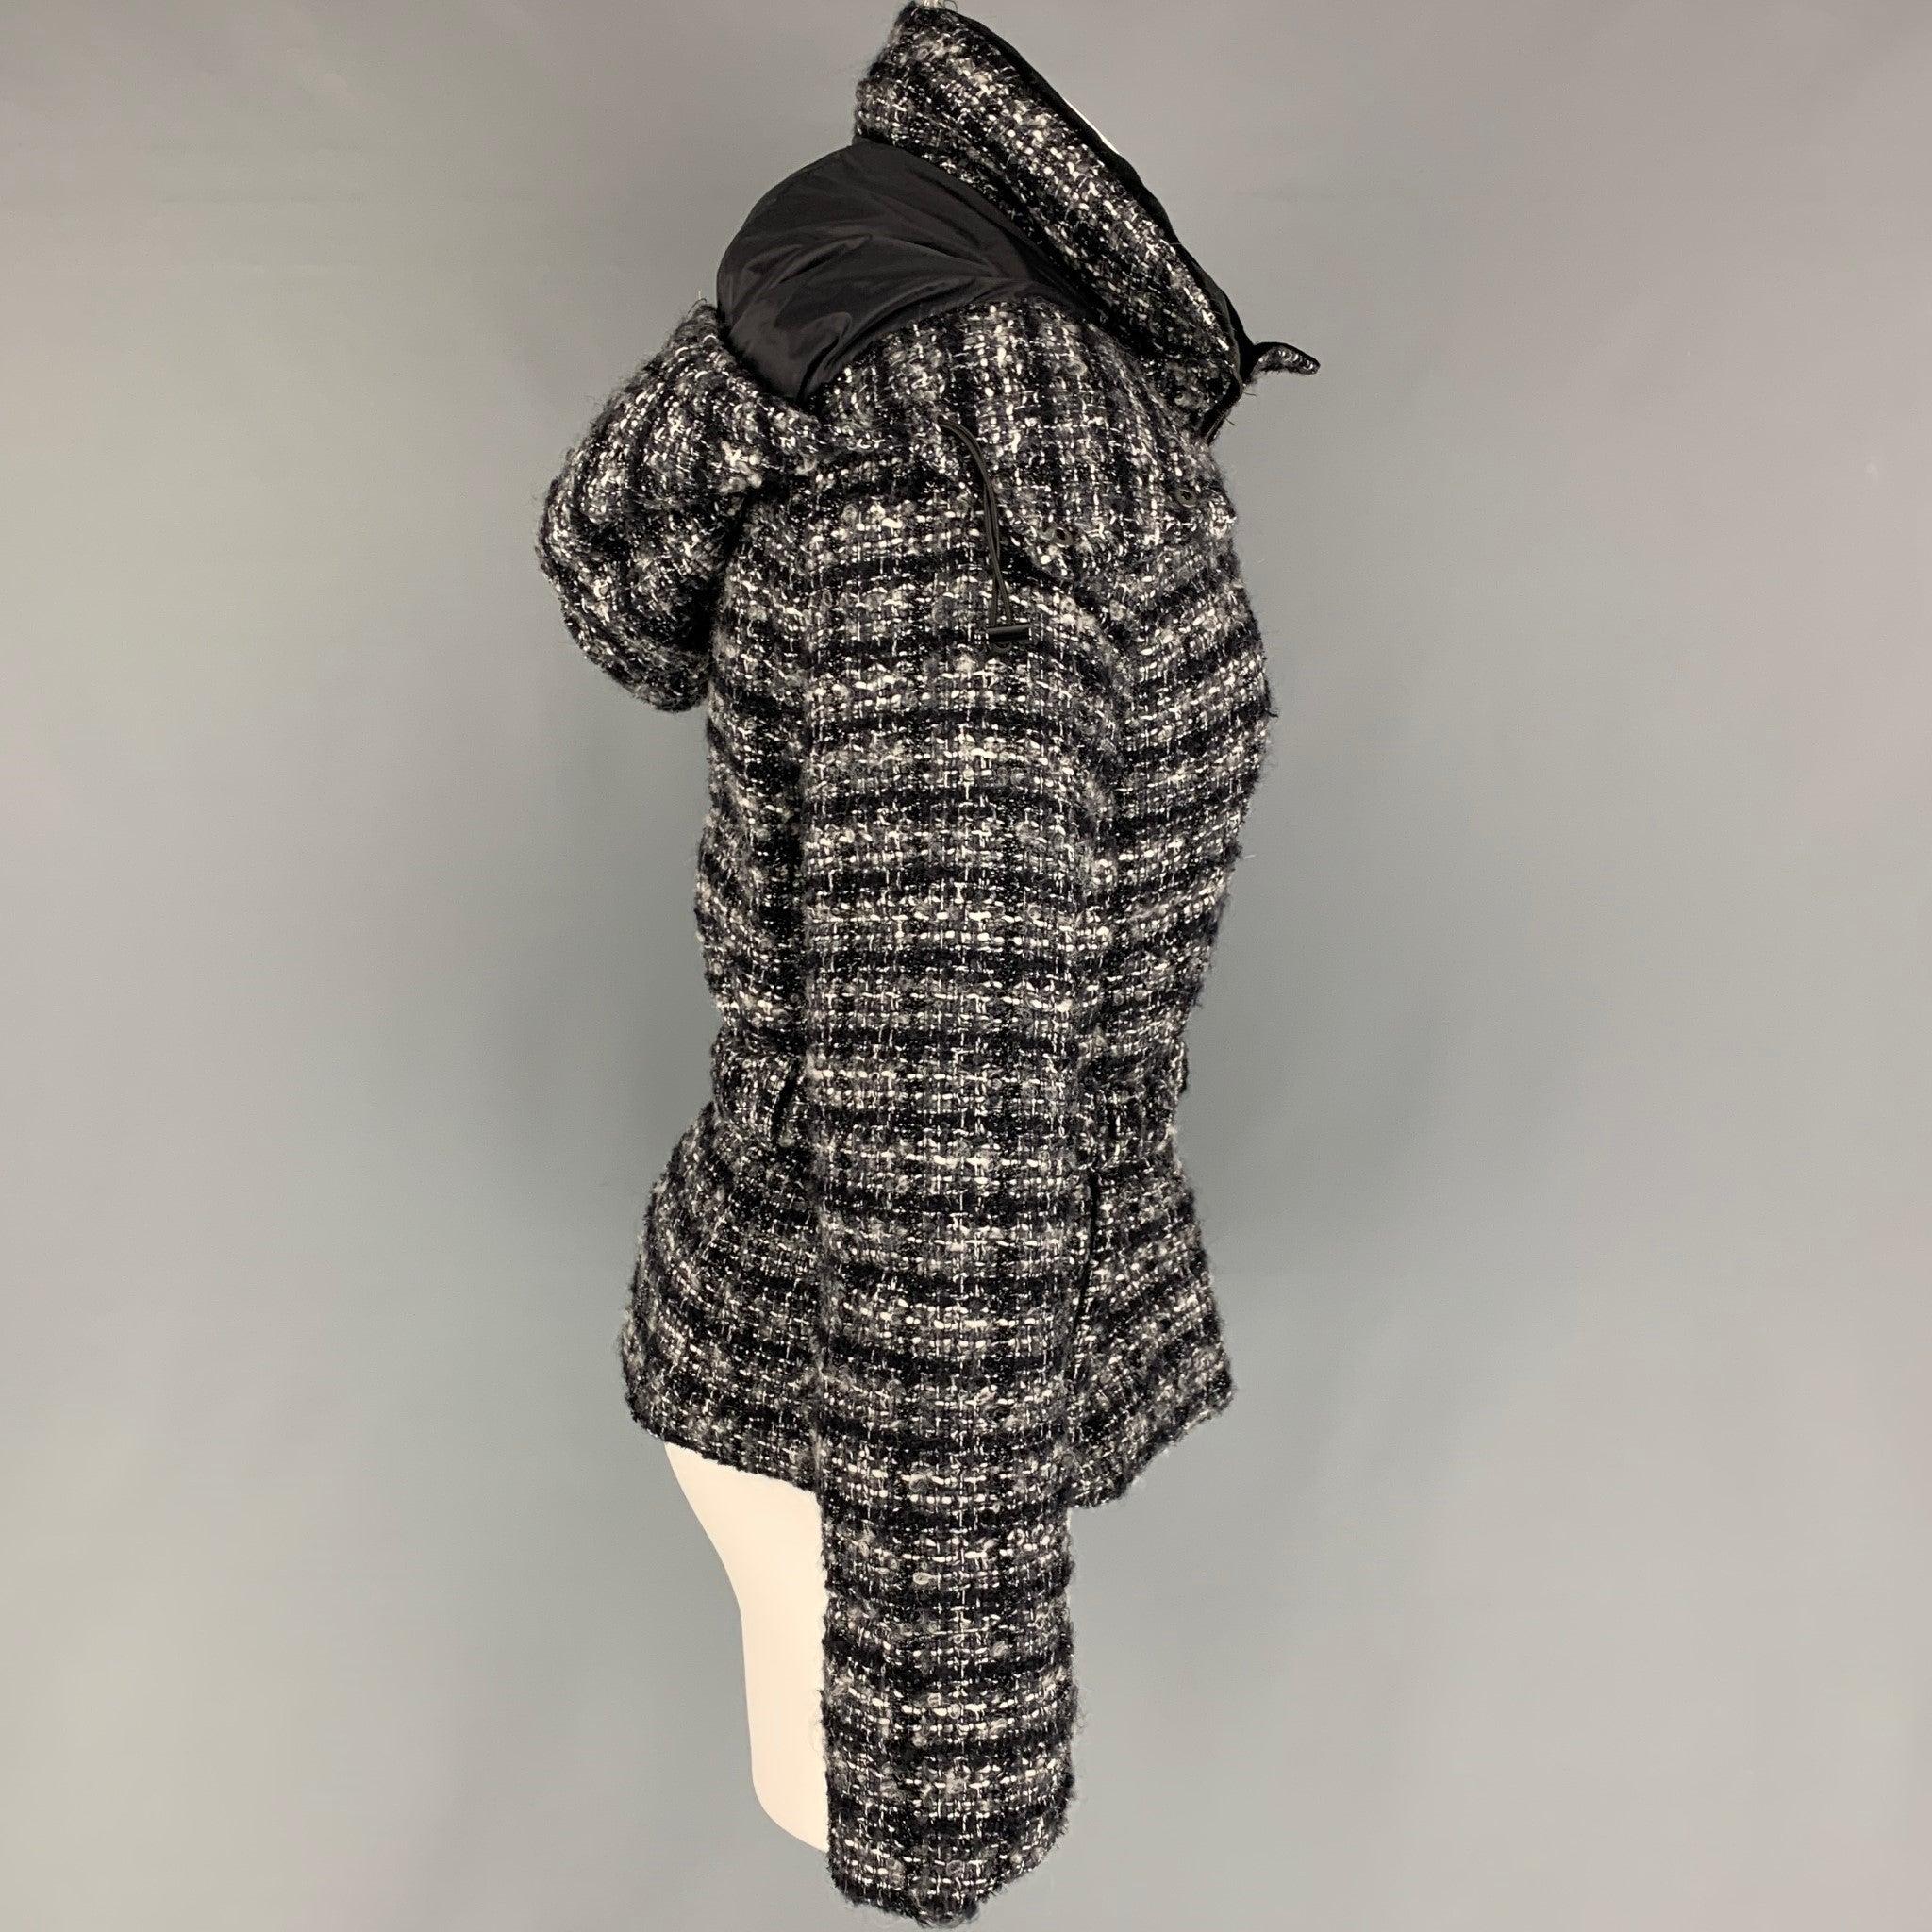 EMPORIO ARMANI jacket comes in a black & white woven wool featuring a hooded detail, belted, high collar, and a zip up closure.
Very Good
Pre-Owned Condition. 

Marked:   40 

Measurements: 
 
Shoulder: 16 inches  Bust: 36 inches  Sleeve: 24.5